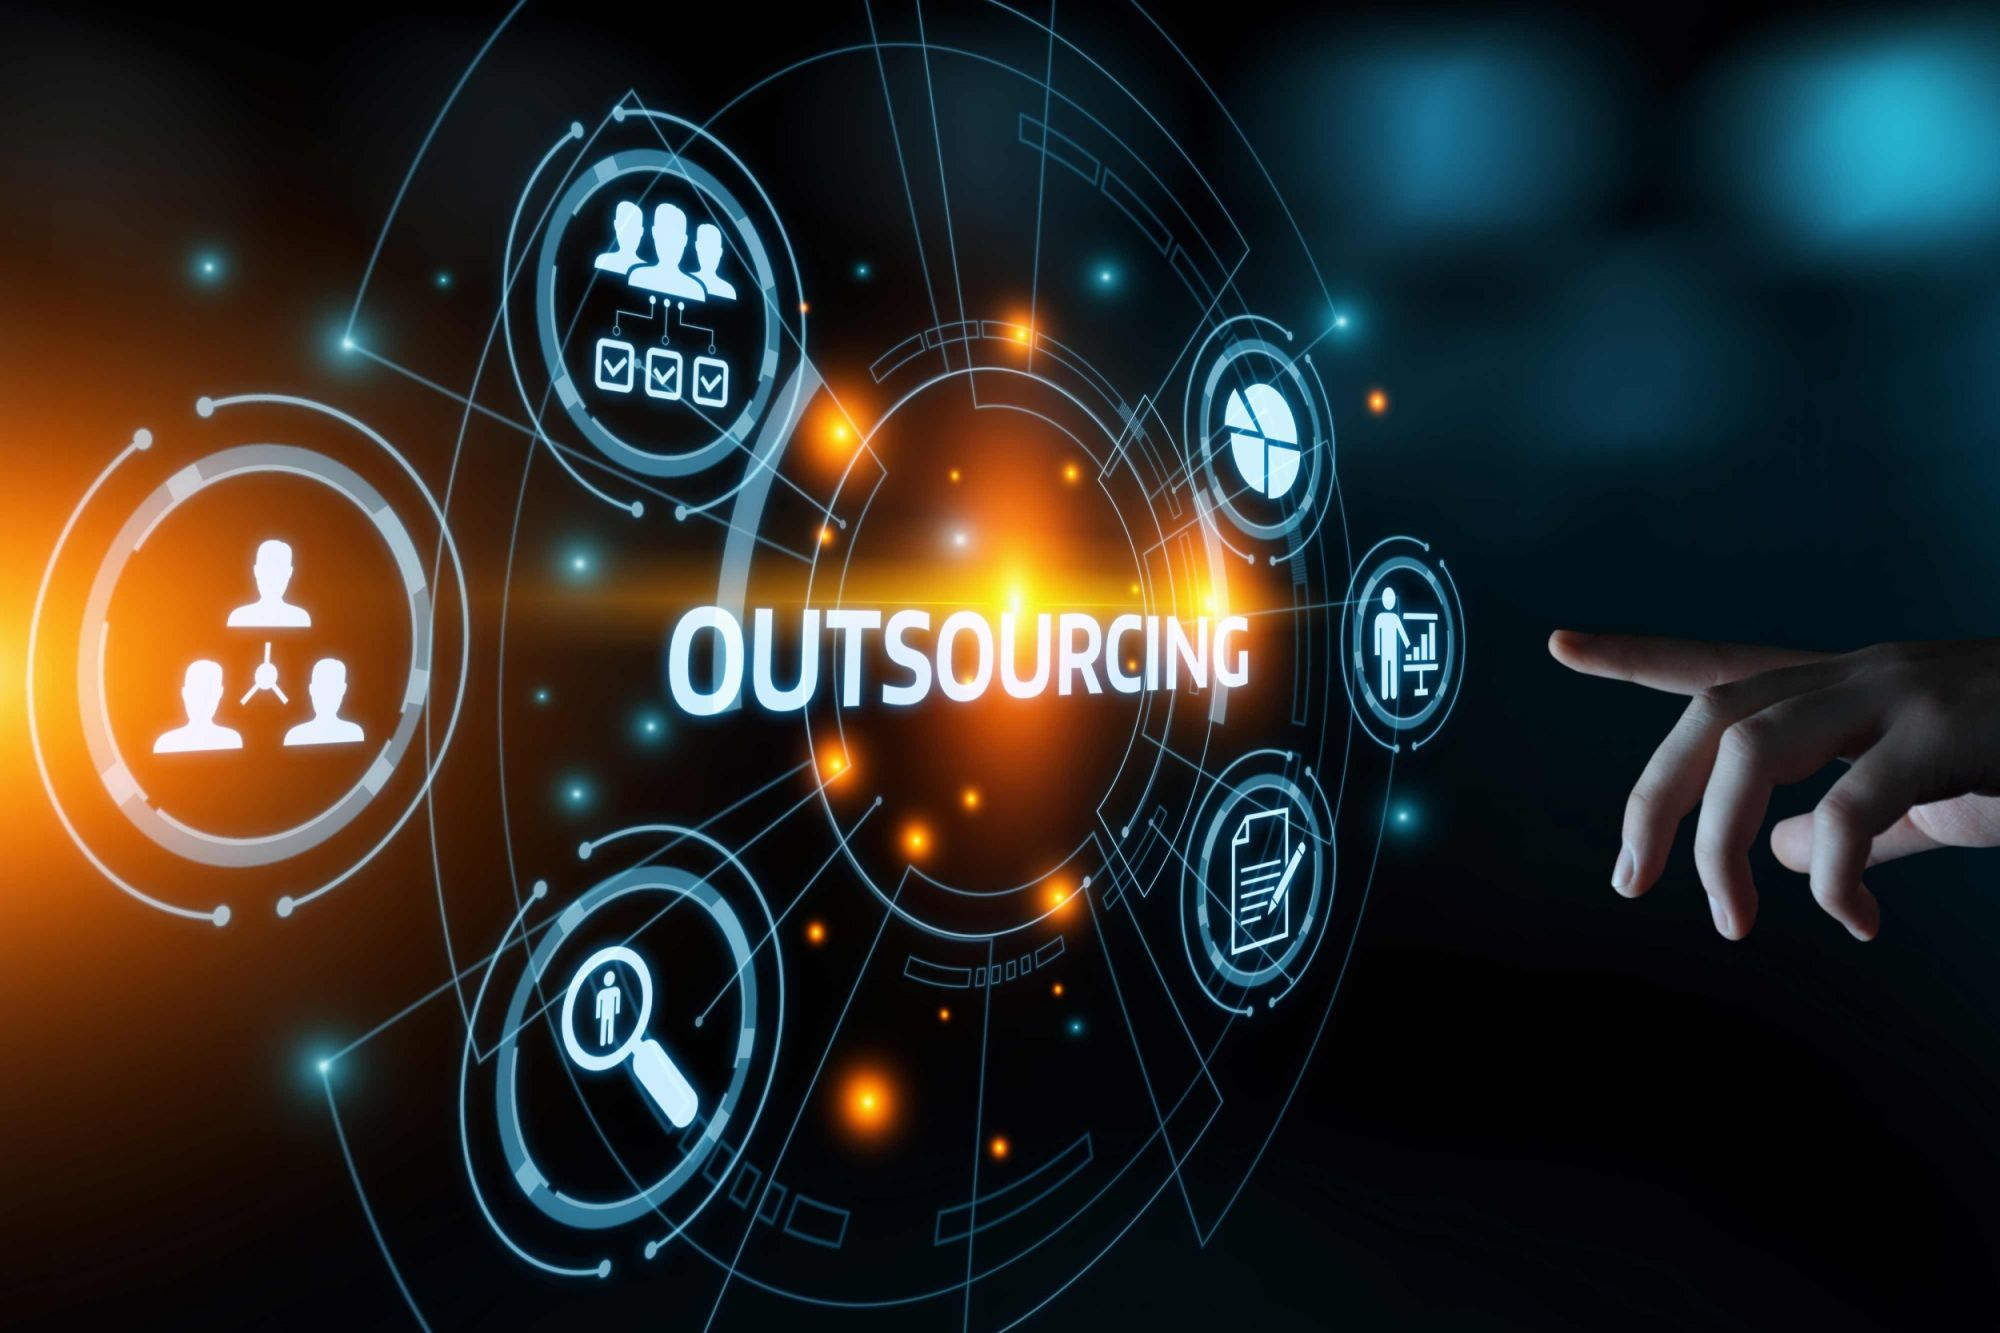 HR Outsourcing Trends